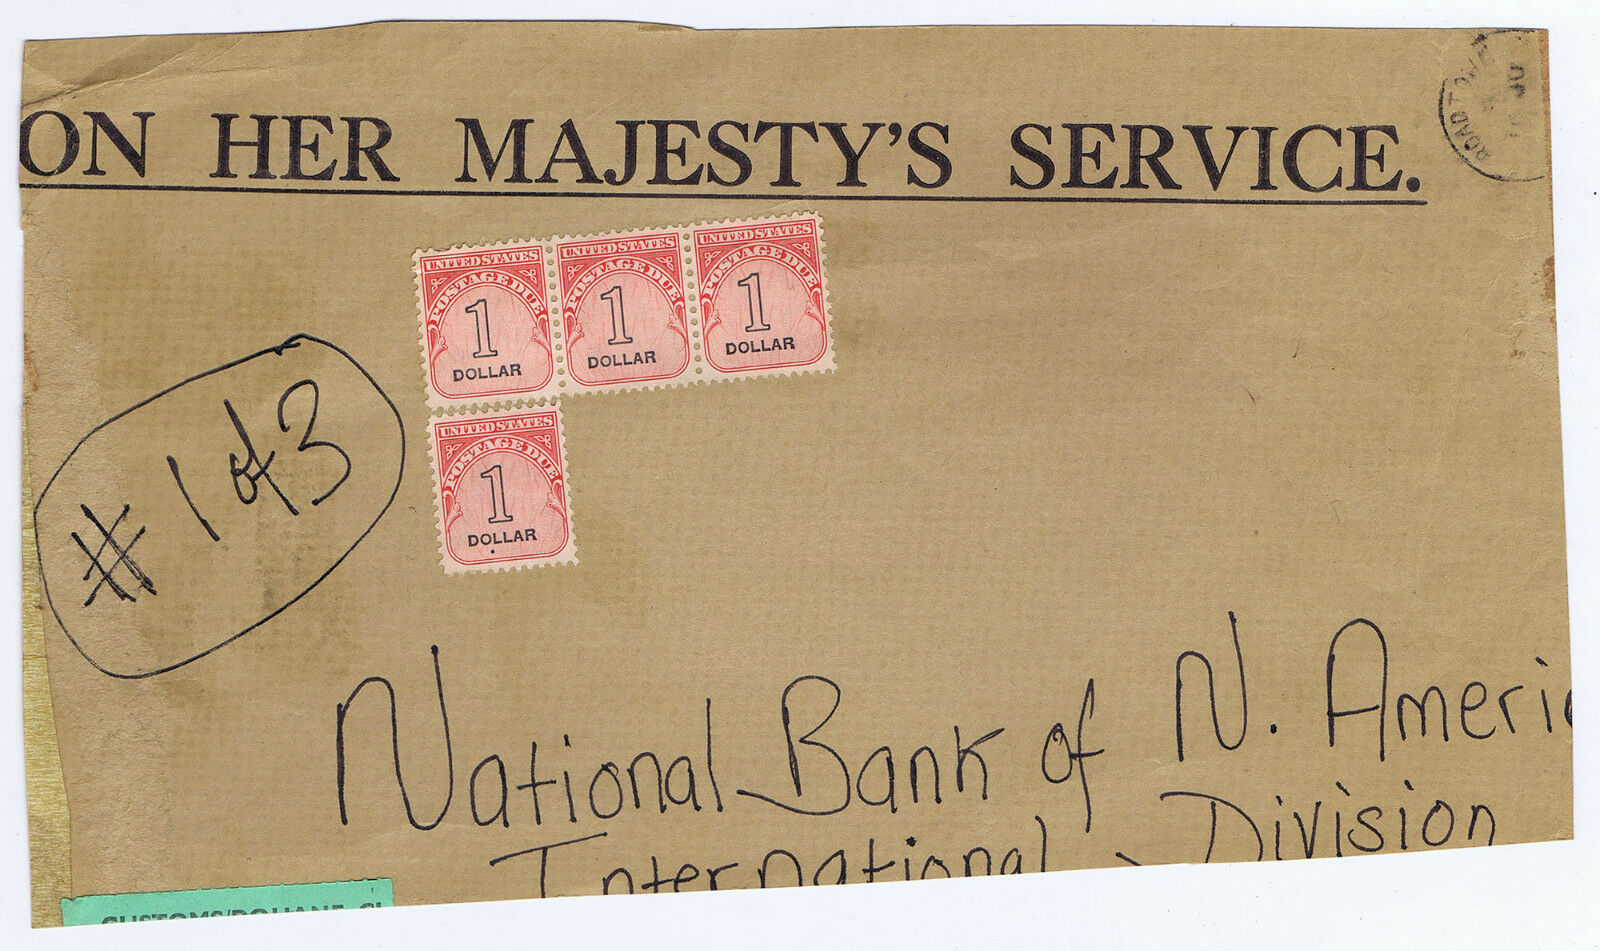 ON HER MAJESTY'S SERVICE USA POSTAGE DUE to NATIONAL BANK of N. AMERICA from BVI